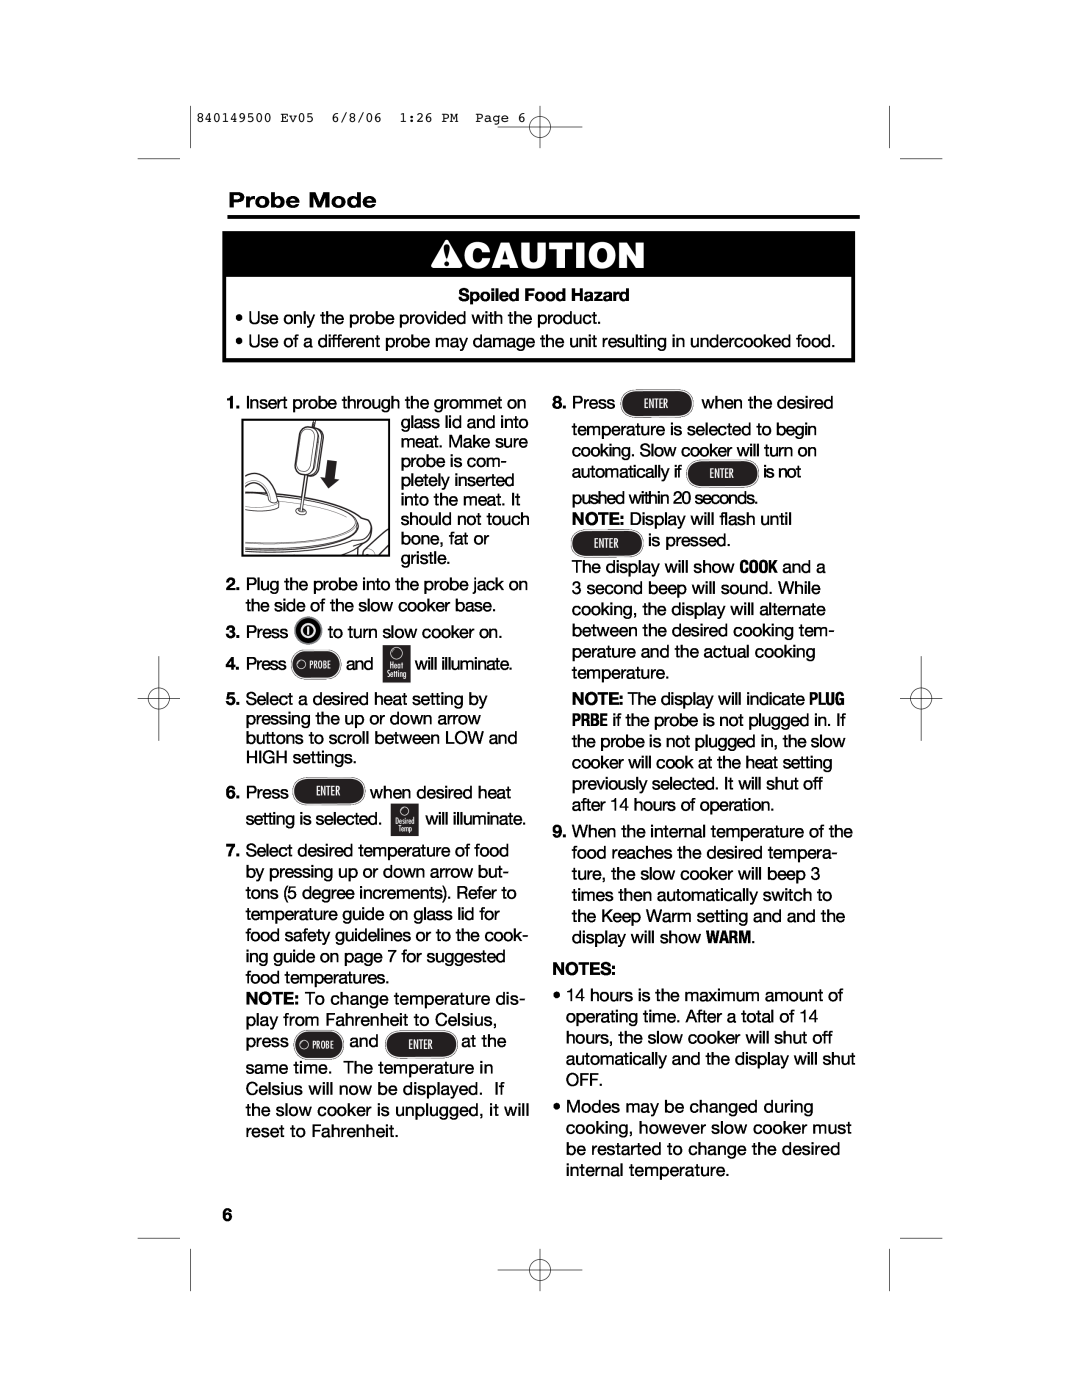 Proctor-Silex 840149500 manual wCAUTION, Probe Mode, Spoiled Food Hazard, automatically if 